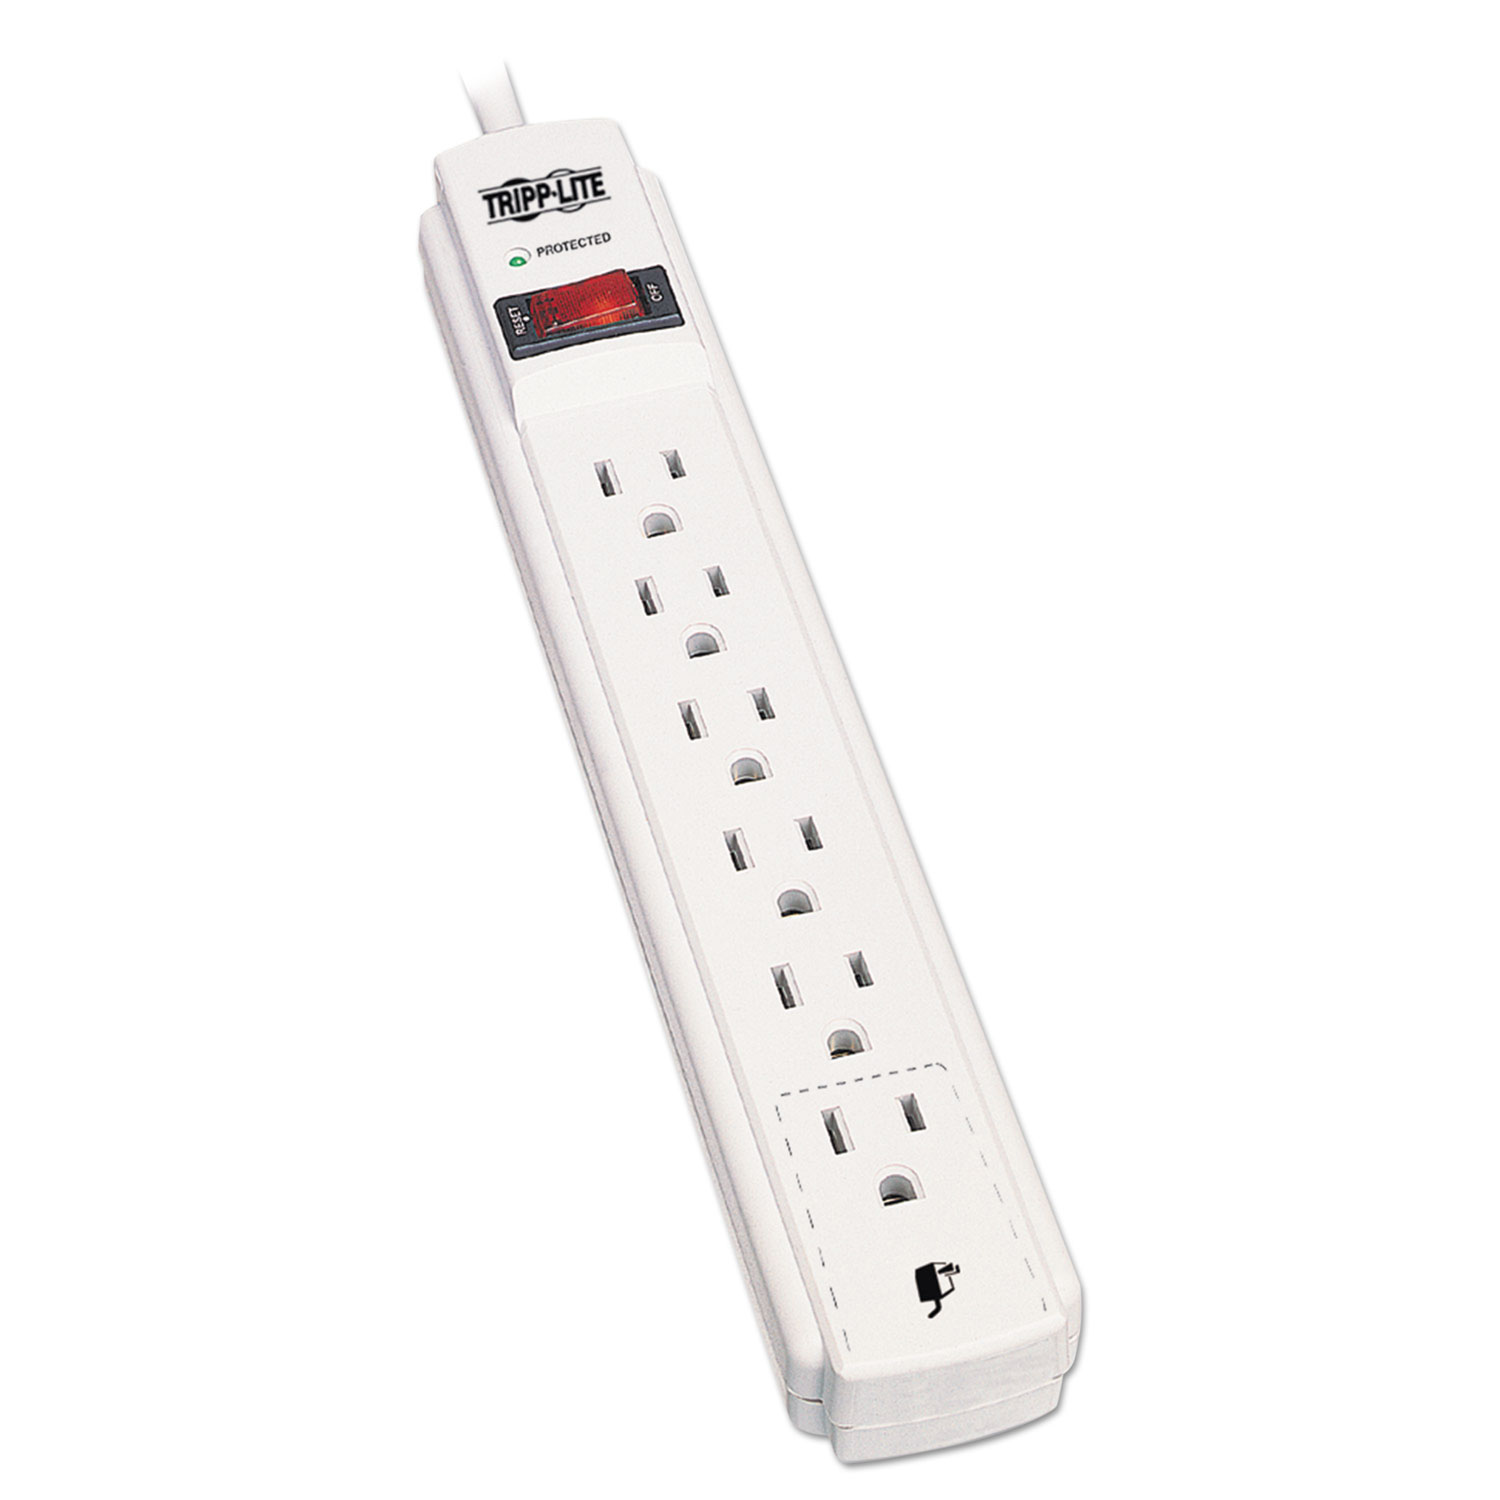  Tripp Lite TLP615 Protect It! Surge Protector, 6 Outlets, 15 ft. Cord, 790 Joules, Light Gray (TRPTLP615) 